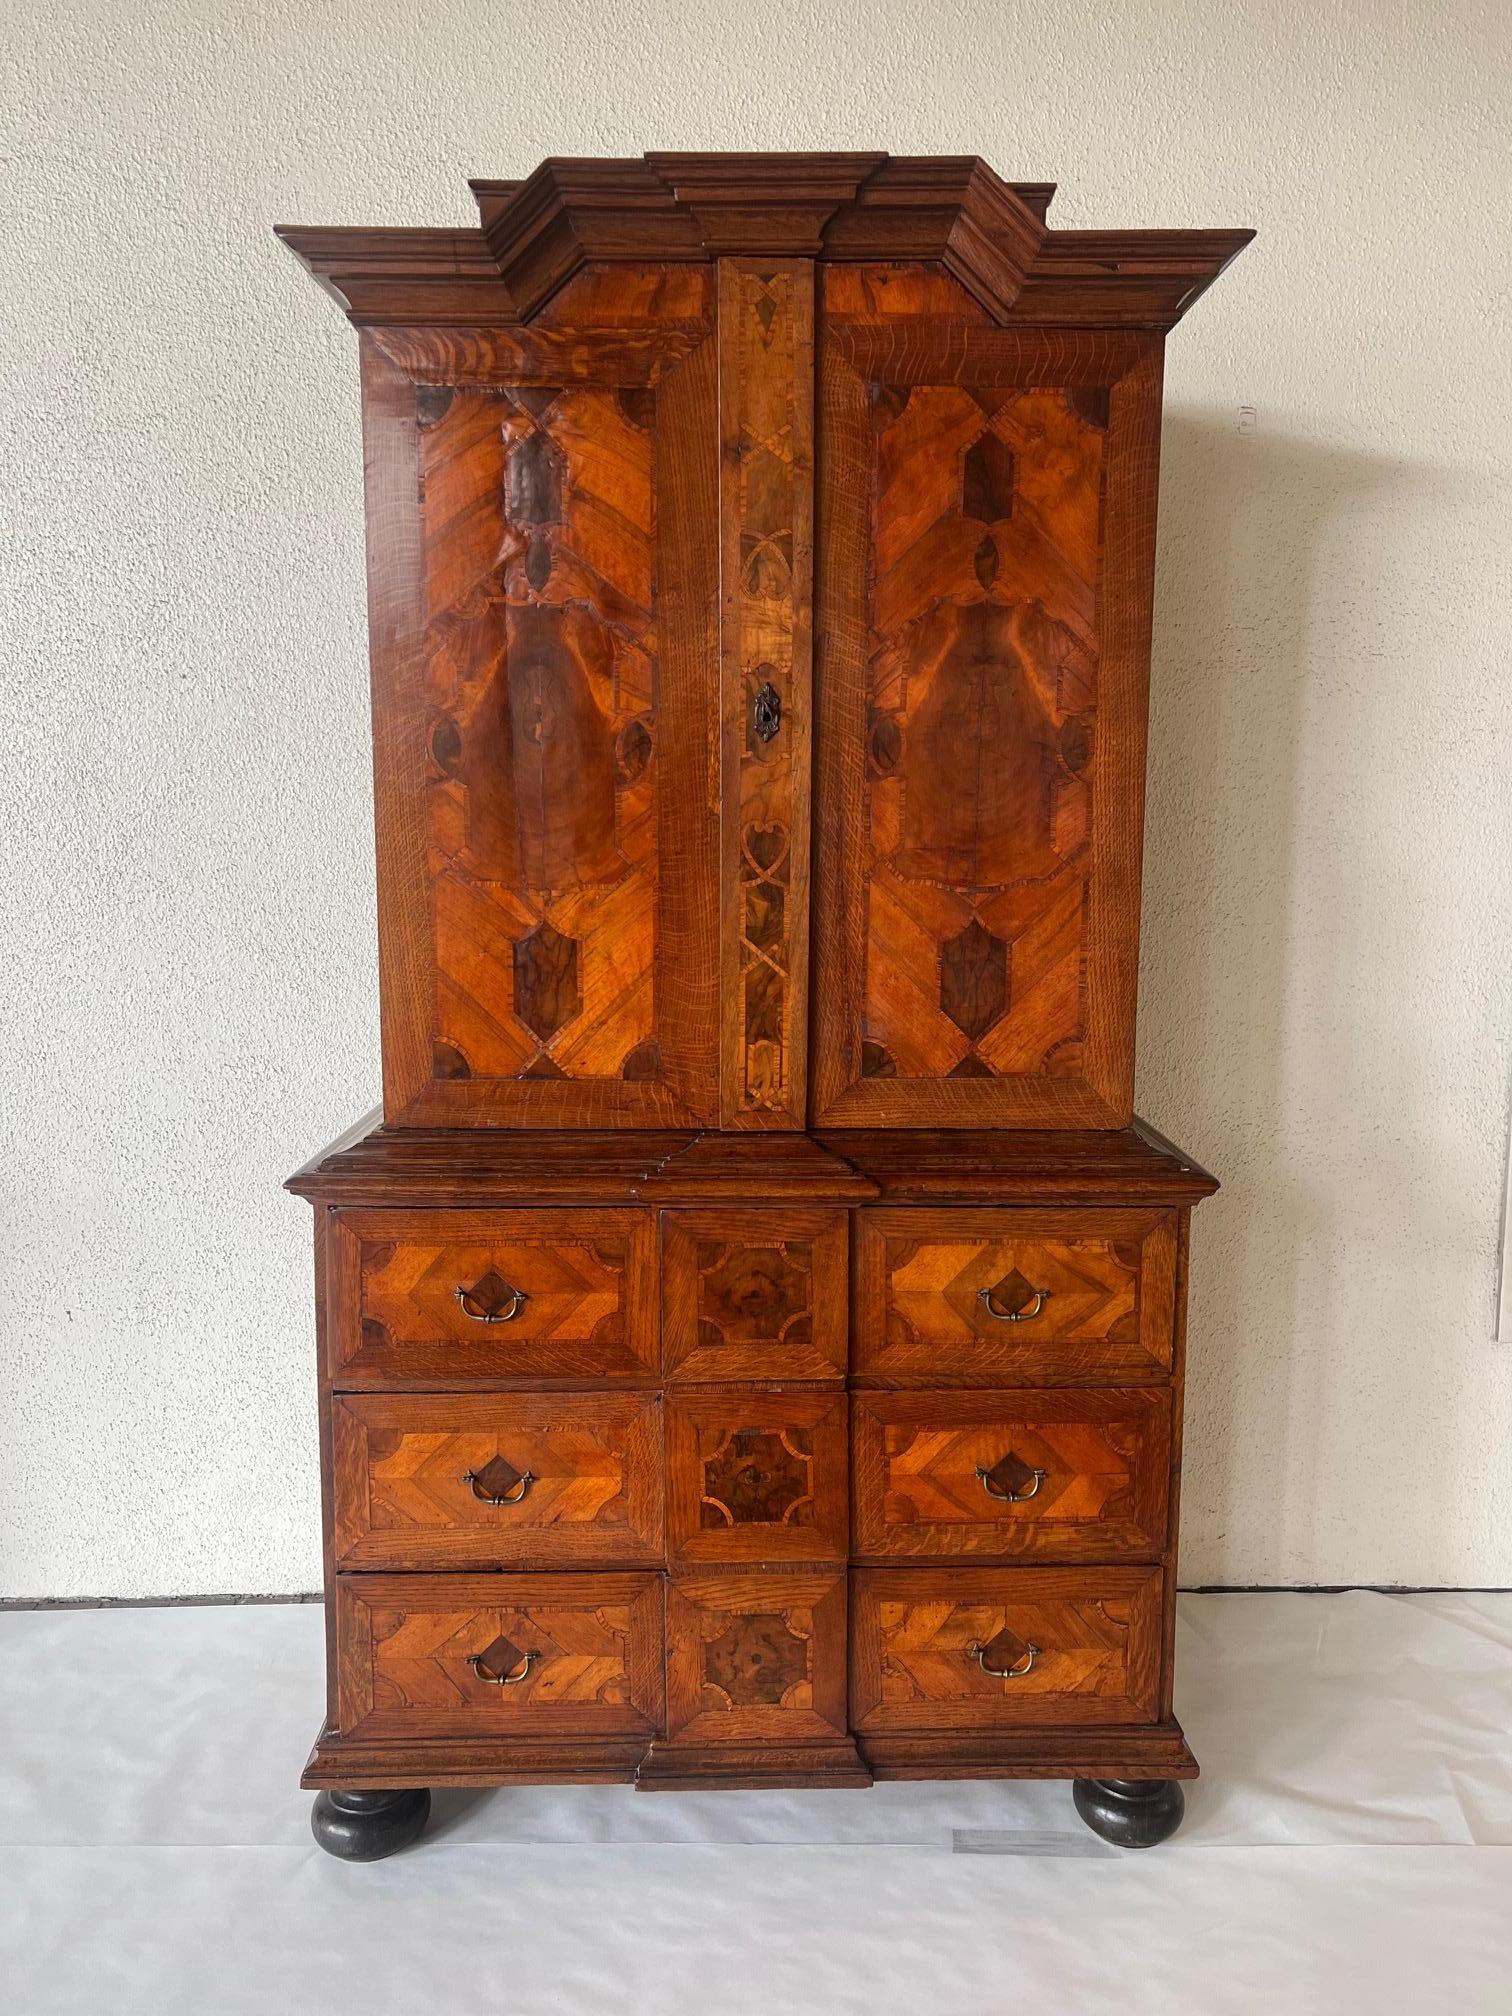 Dutch Colonial Antique Dutch Cabinet Crafted from Walnut and Mahogany  For Sale